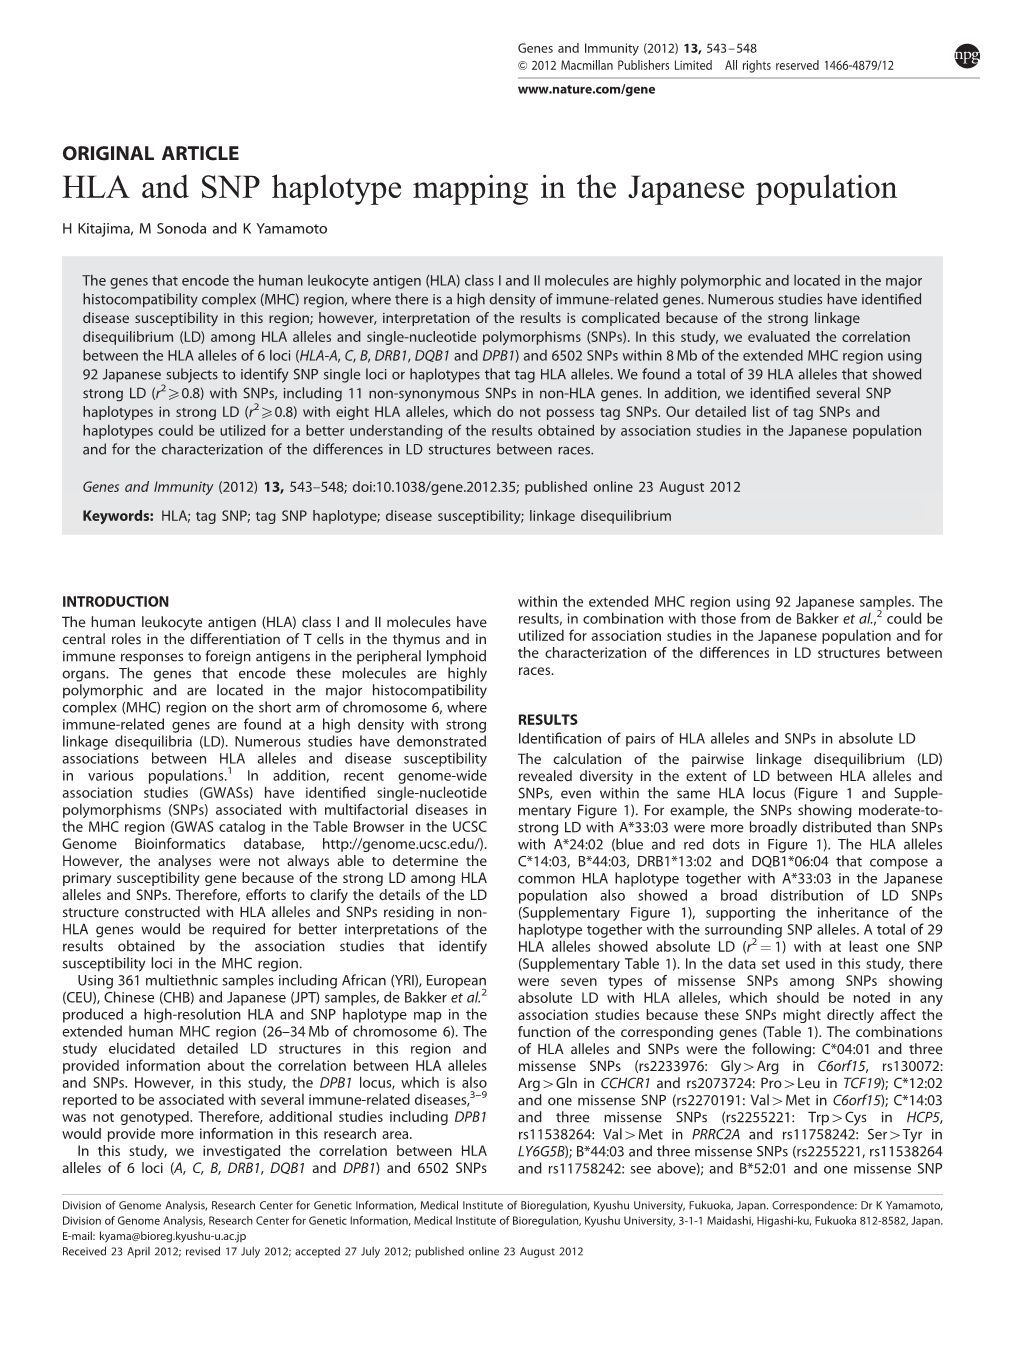 HLA and SNP Haplotype Mapping in the Japanese Population